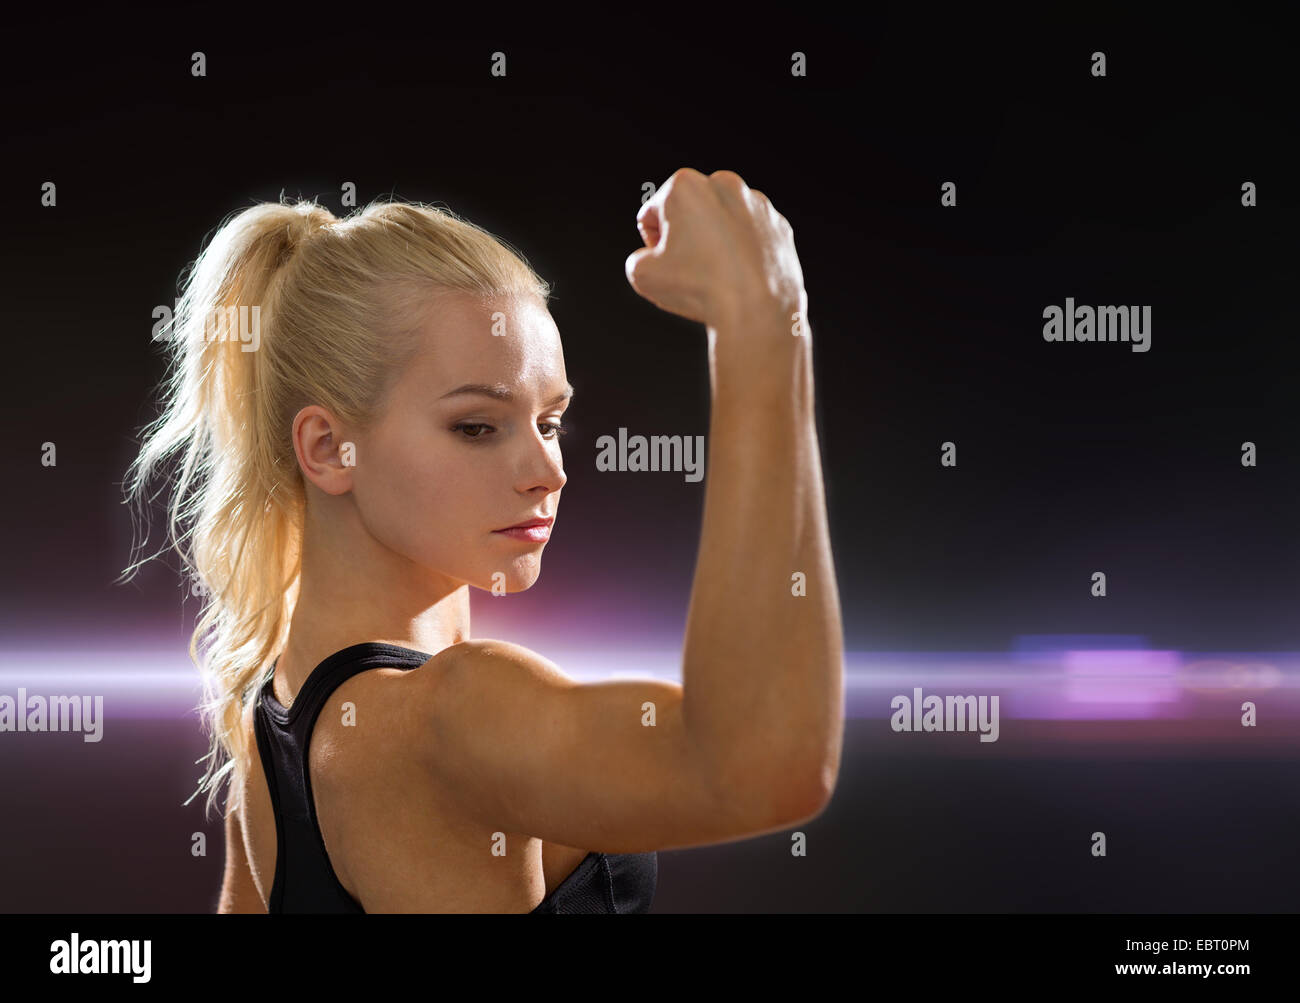 close up of athletic woman flexing her biceps Stock Photo